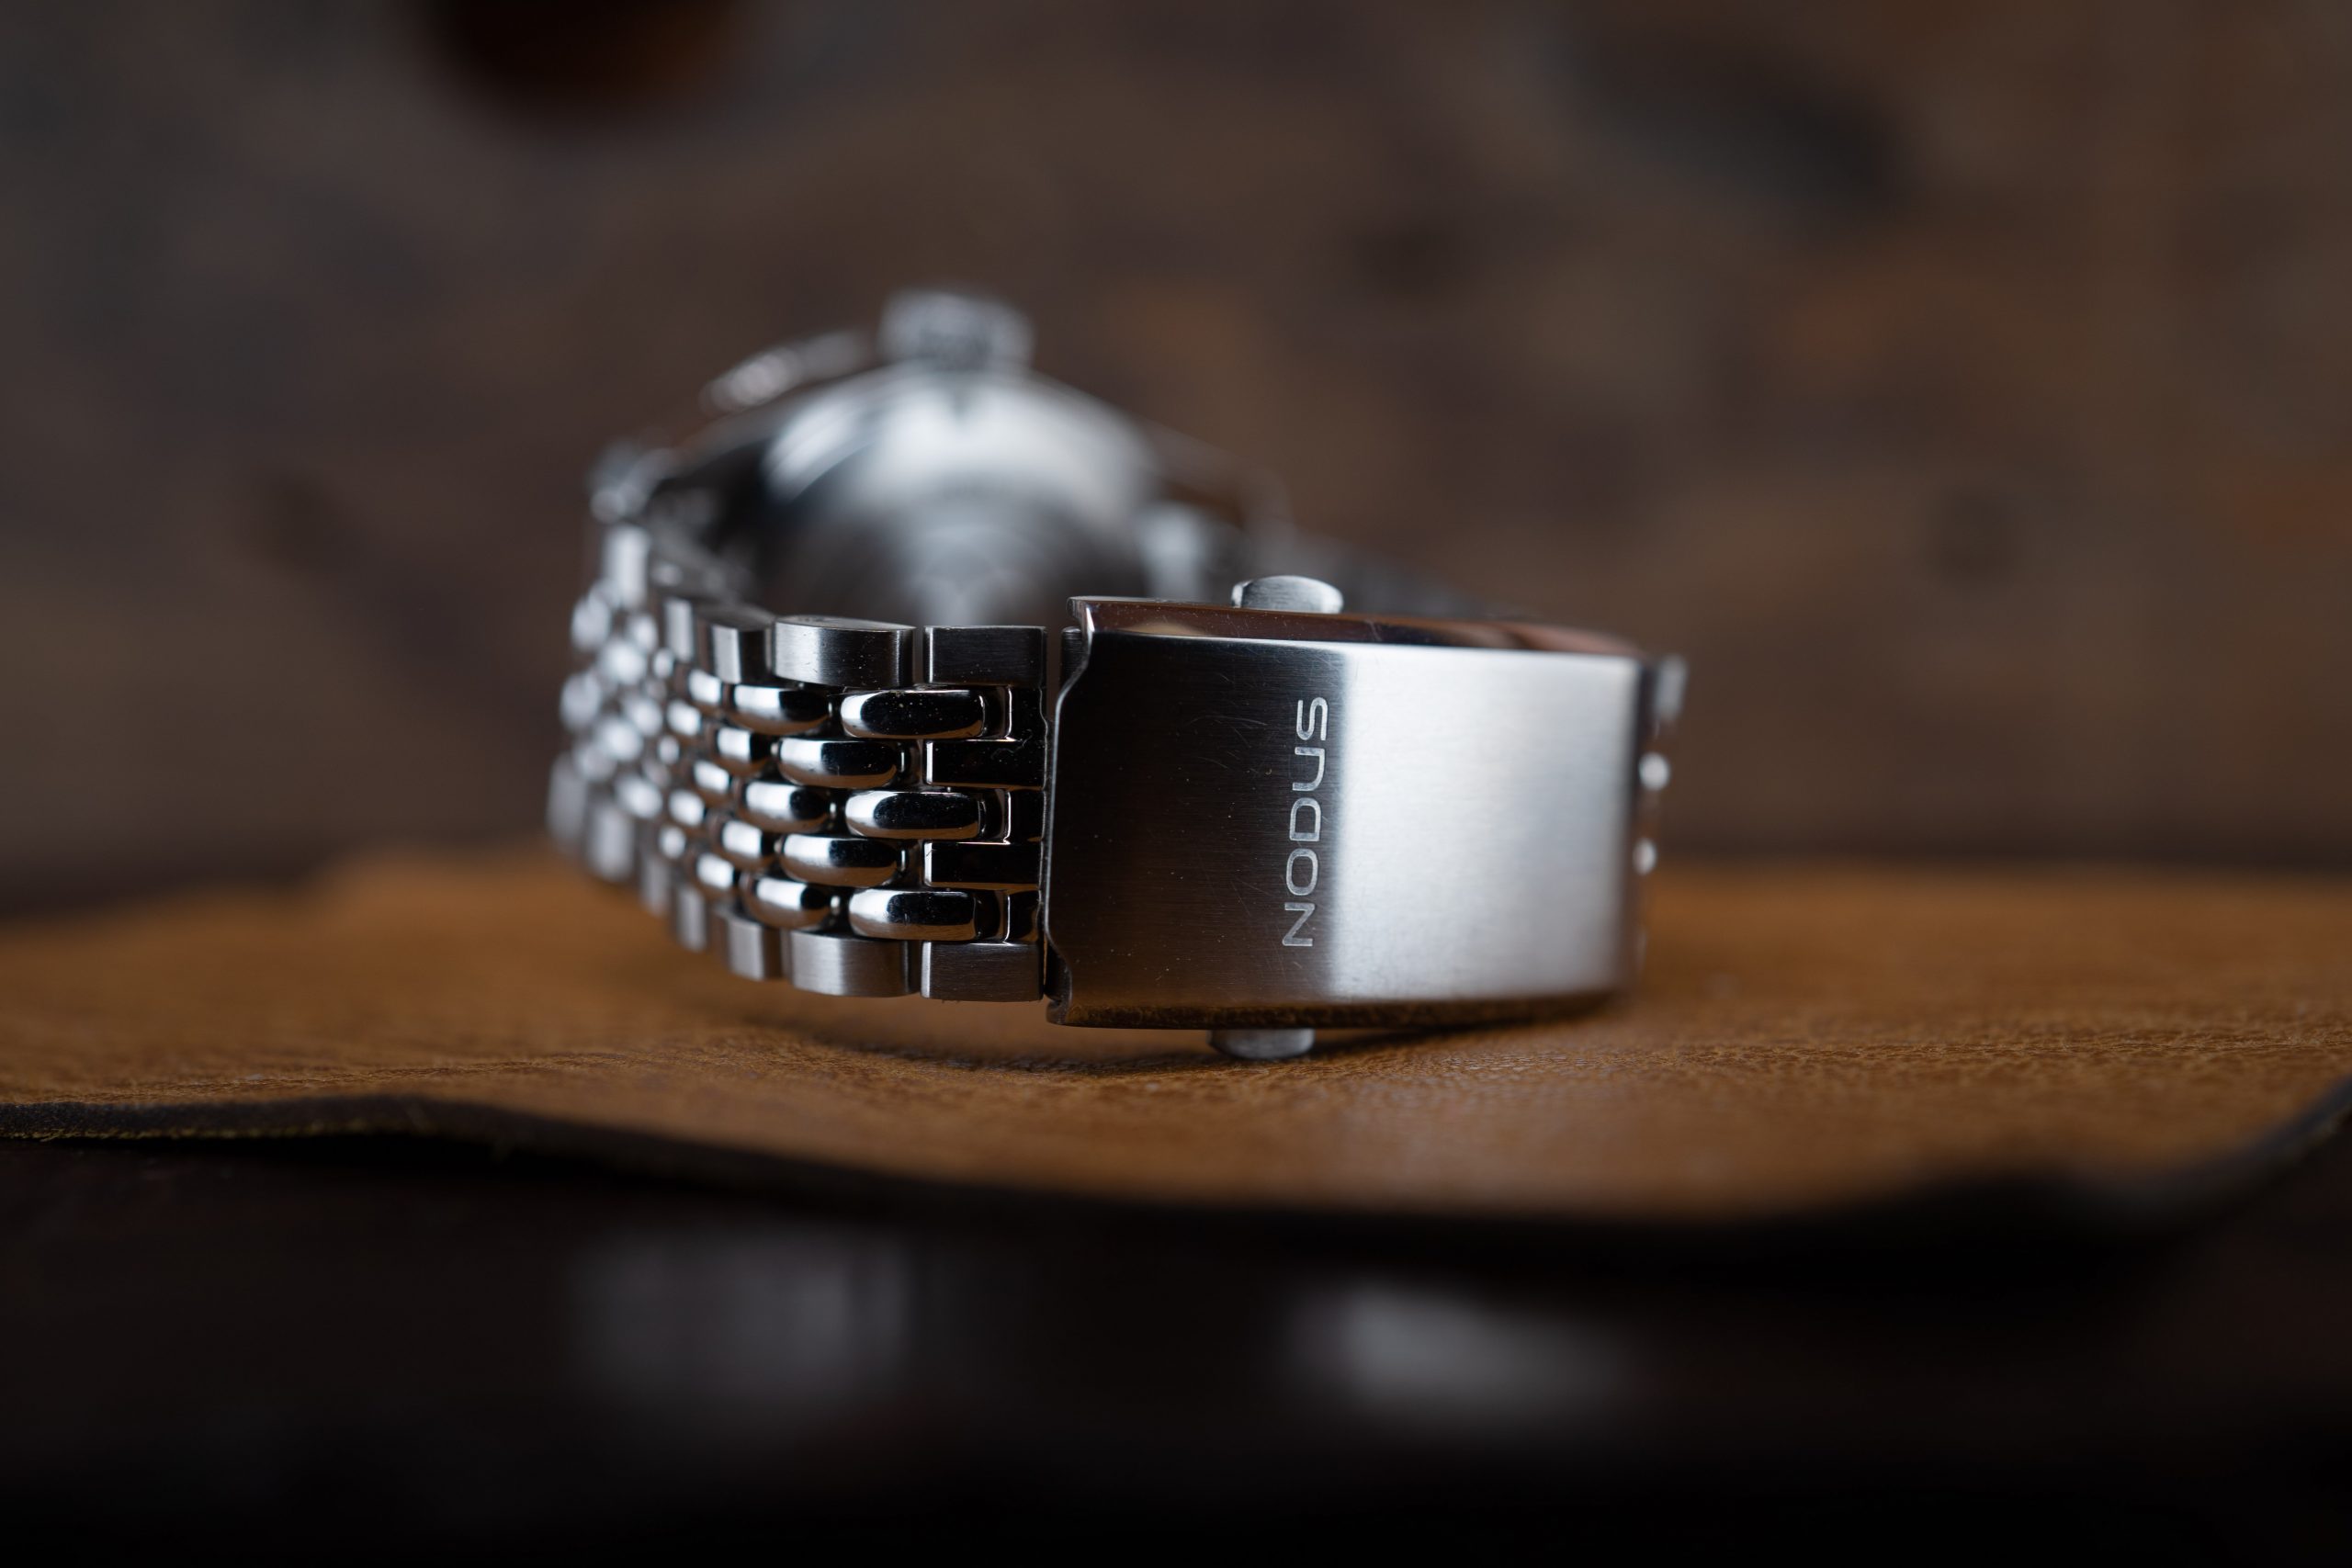 Shot of the Nodus Sector 100 dive watch beads-of-rice bracelet and clasp.